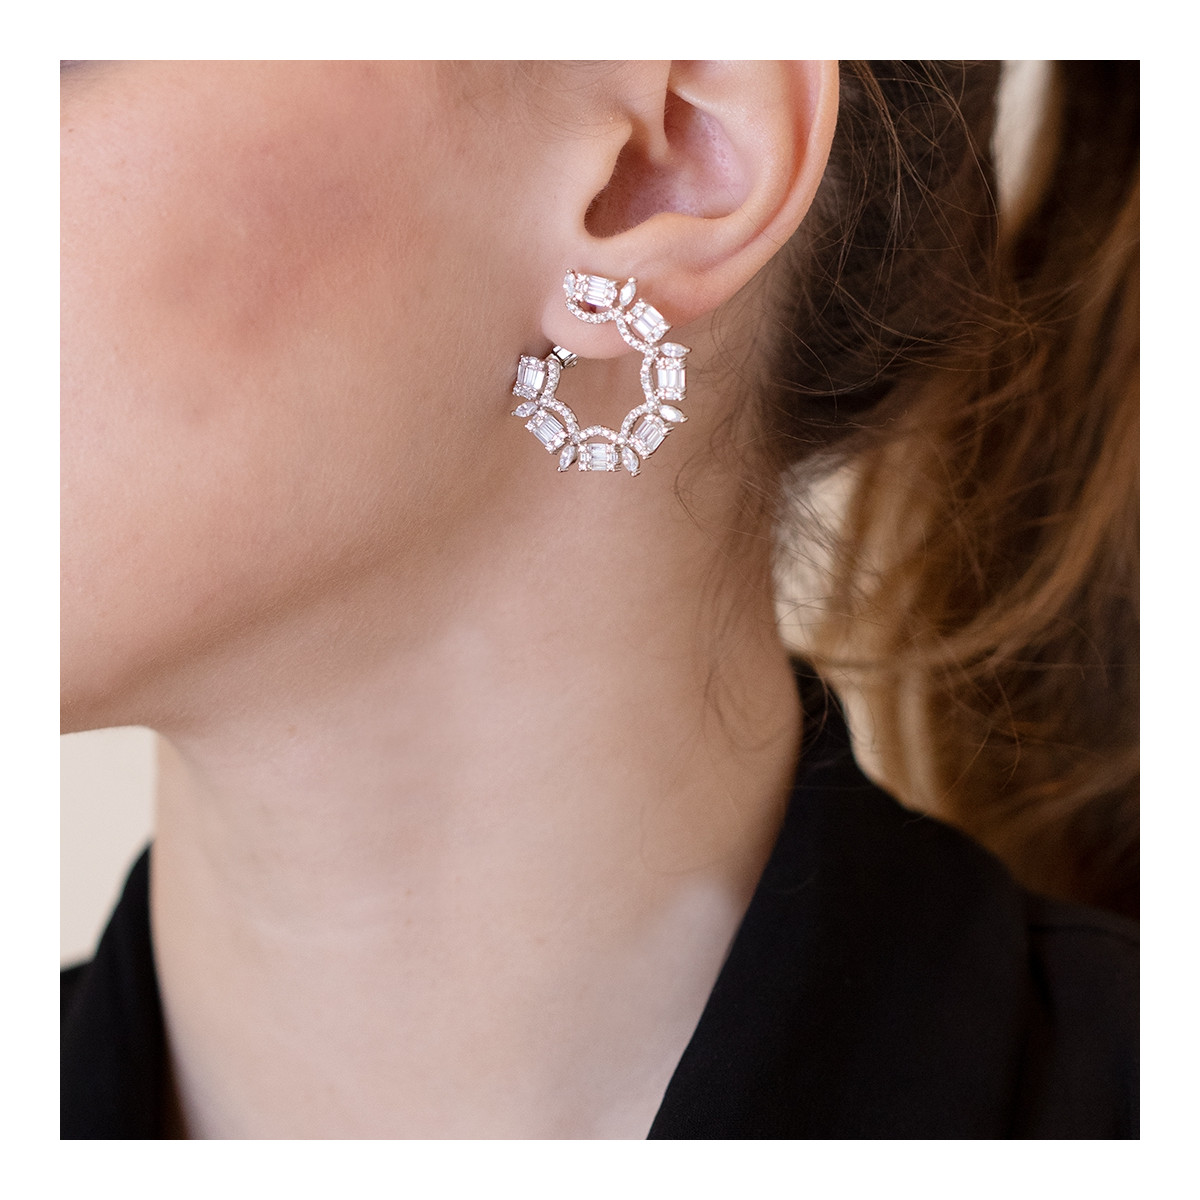 SILVER RING EARRINGS WITH ZIRCONS